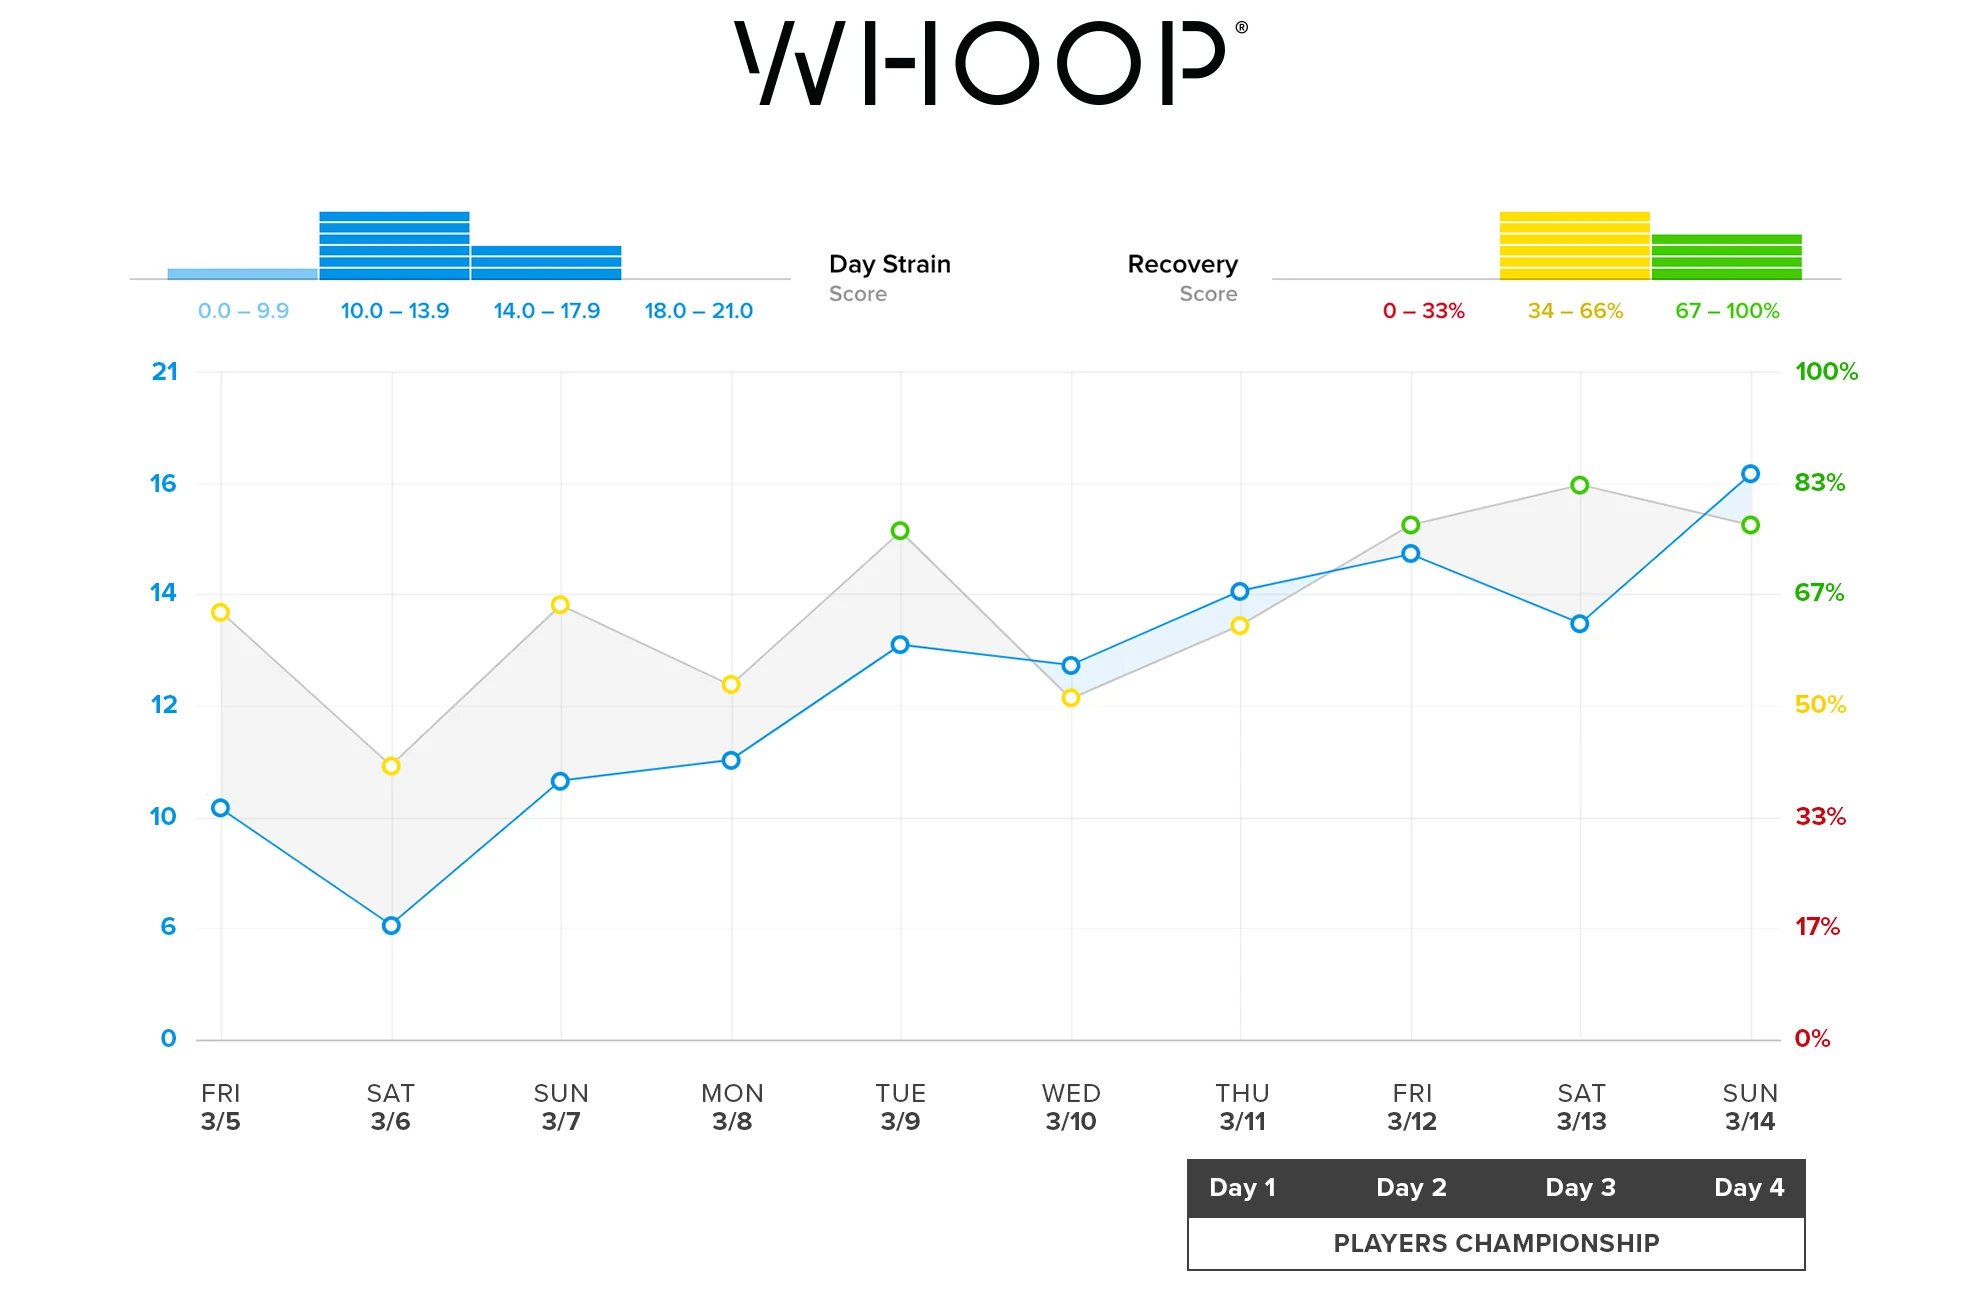 Justin Thomas' daily strain and recovery, tracked by WHOOP, prior to and during his win at the Players Championship.